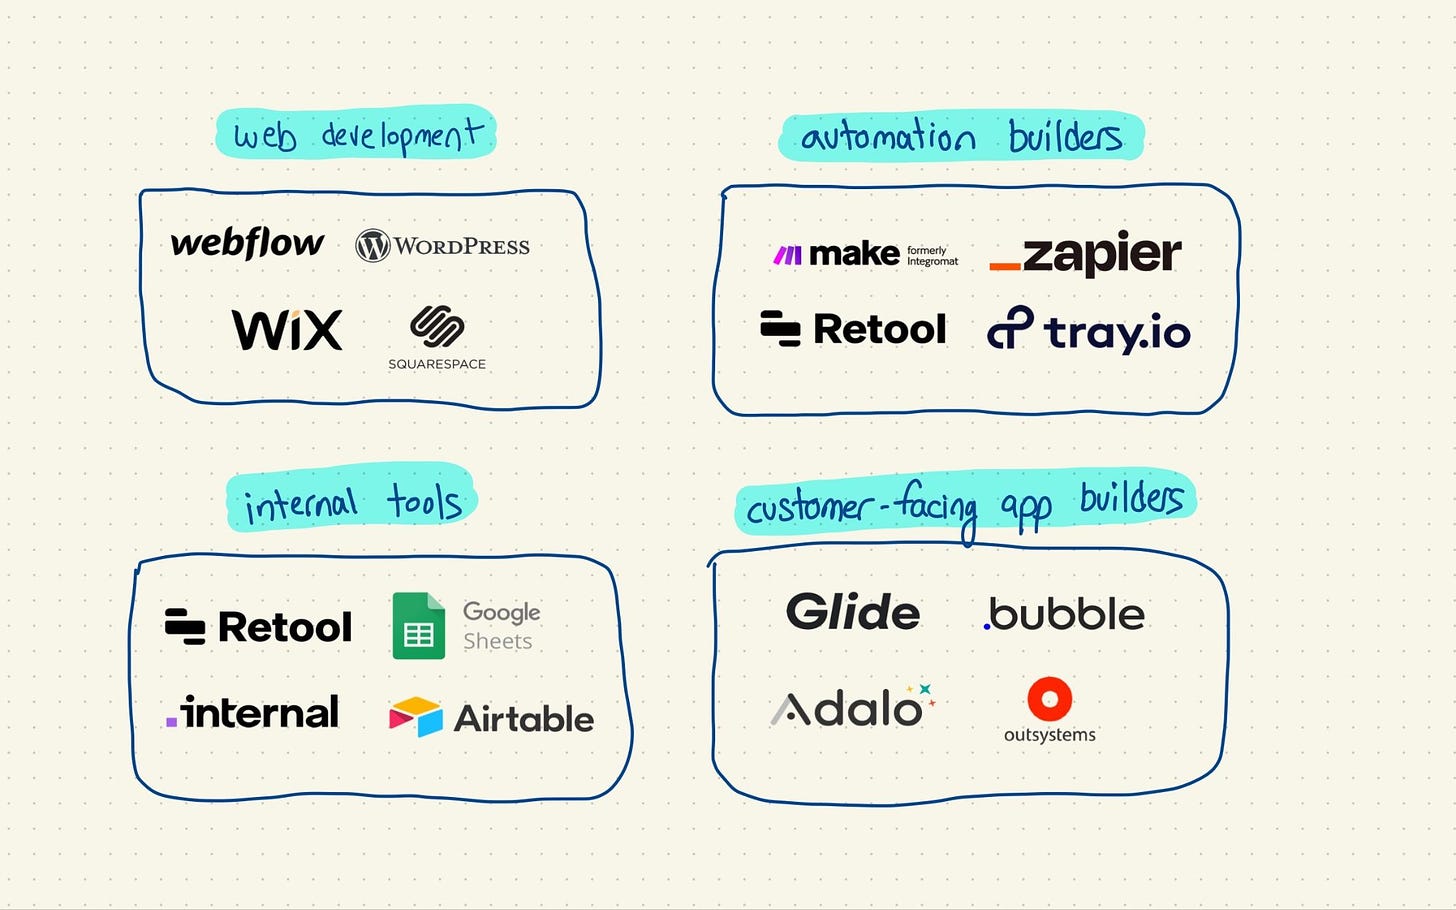 four types of low code tools, web dev, automations, internal tools, customer-facing app builders and some logos of example companies